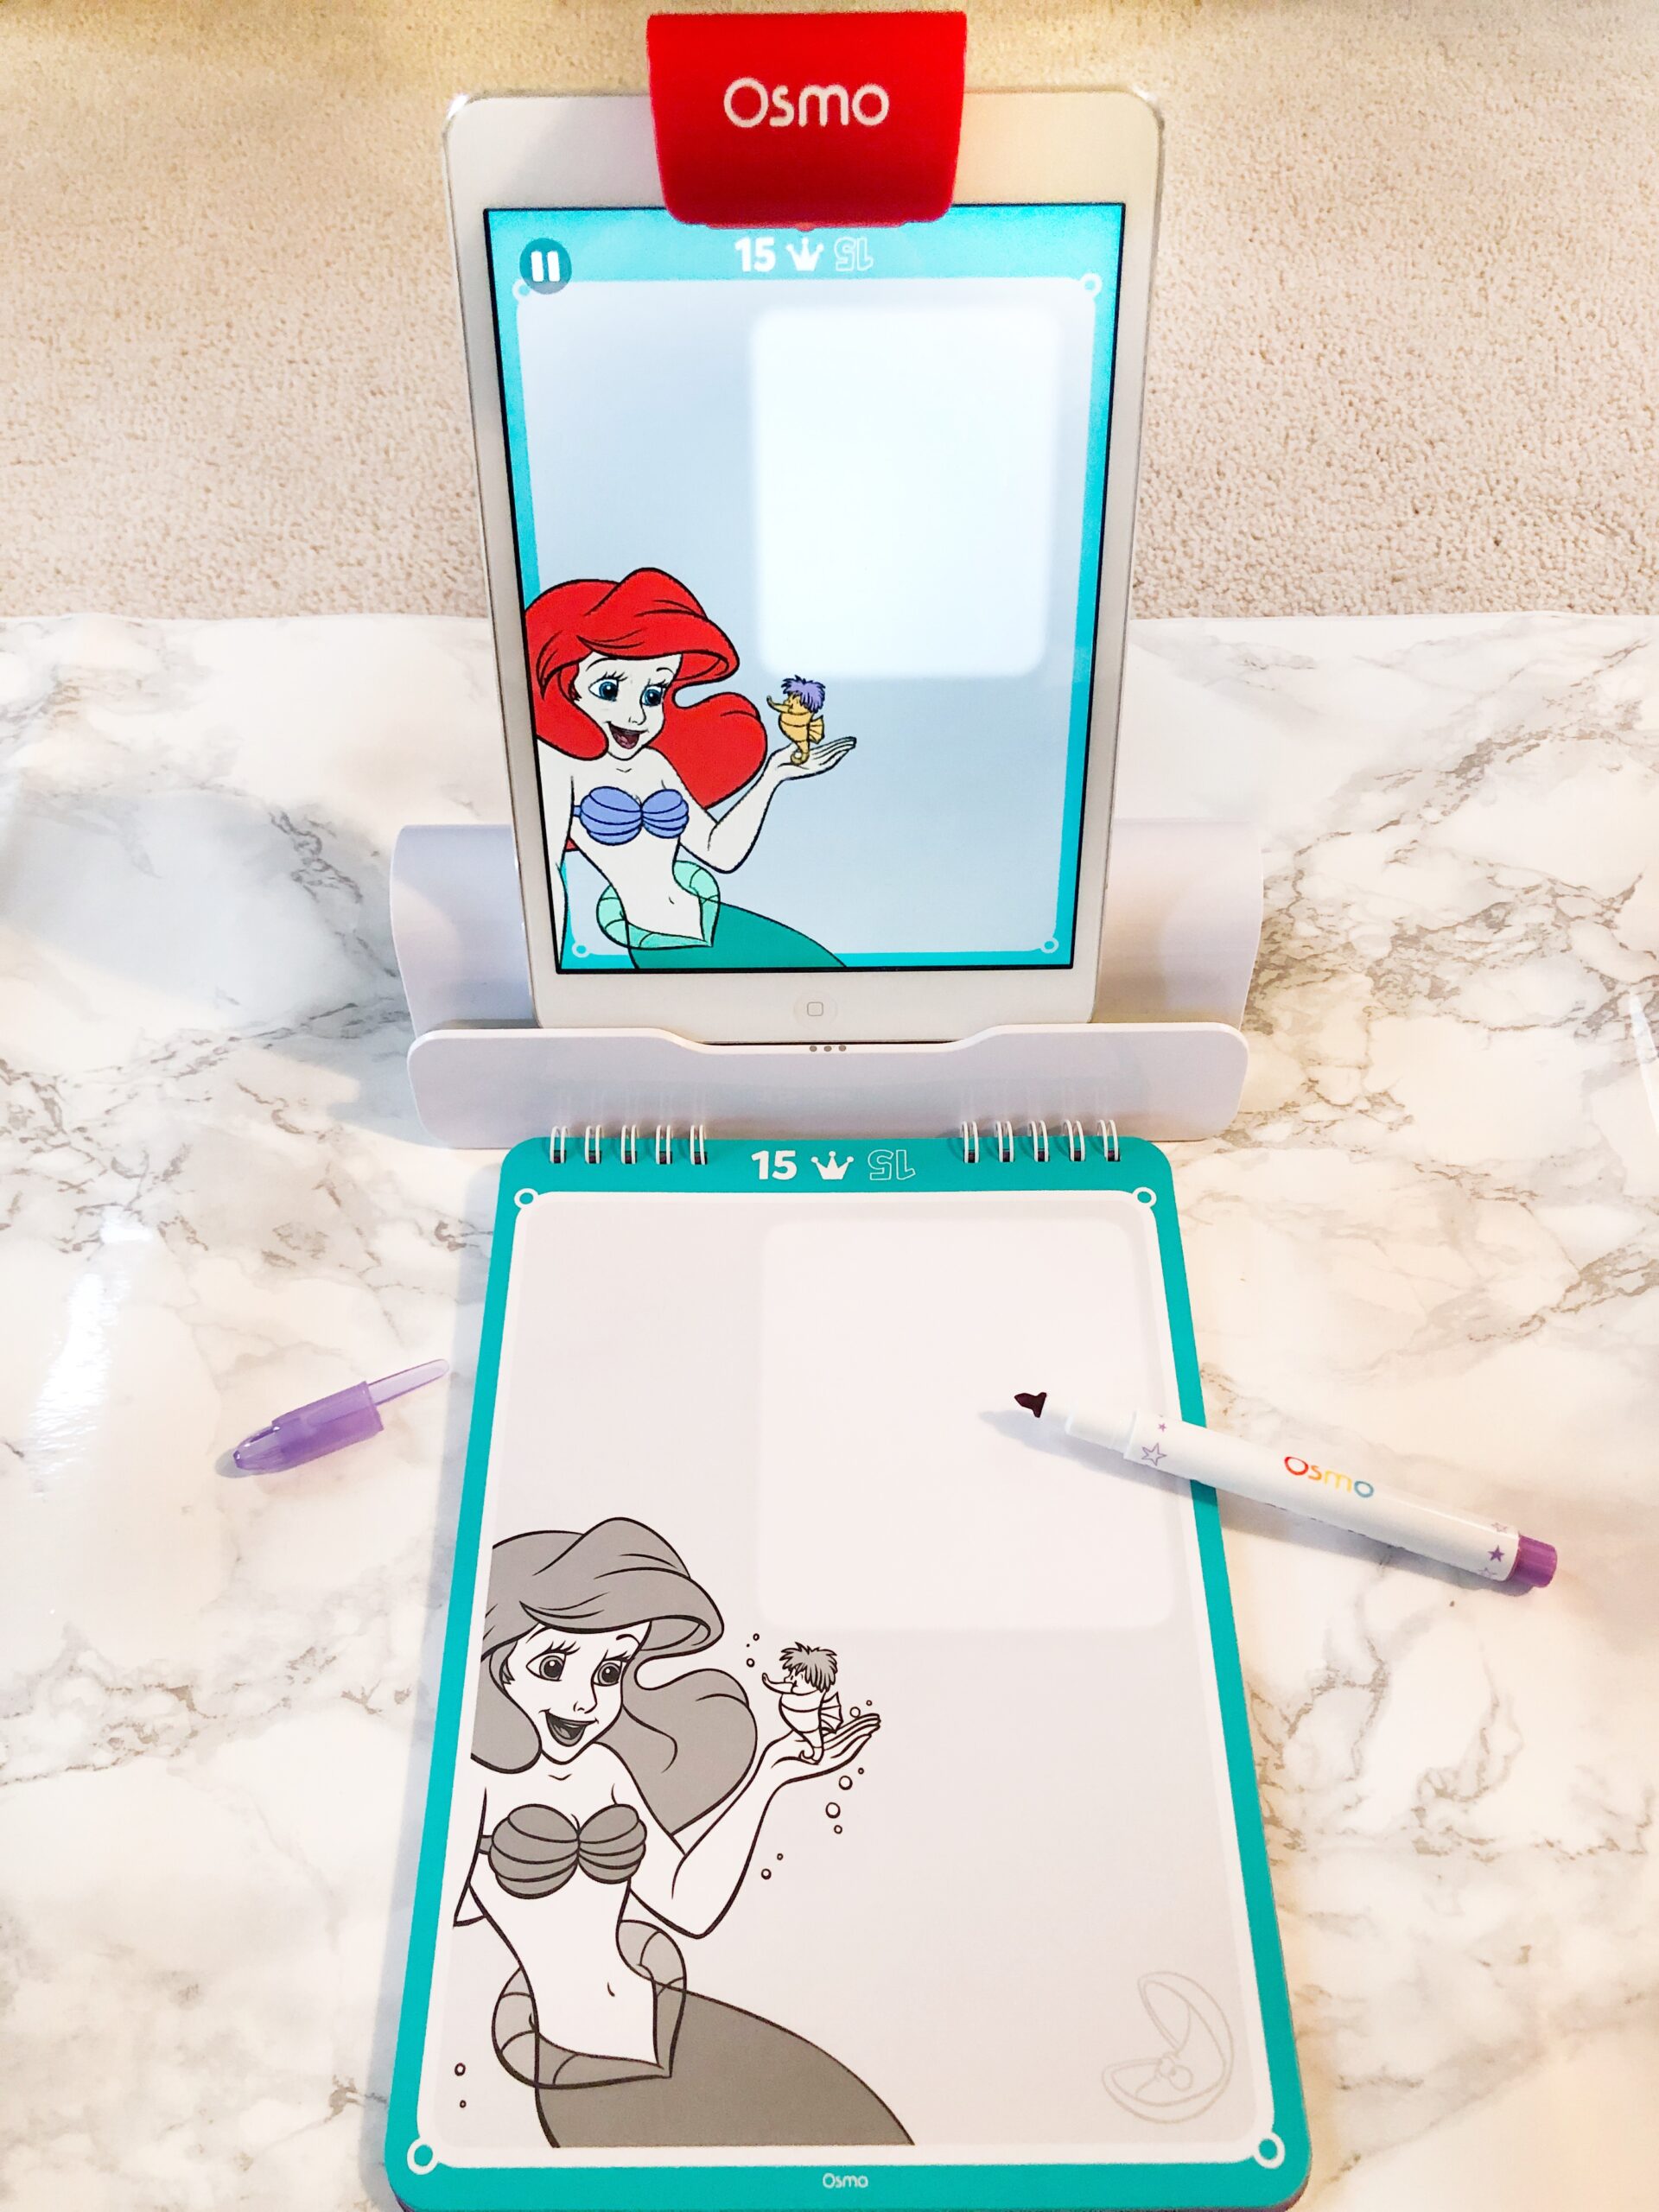 Osmo Super Studio review on livin' life with style